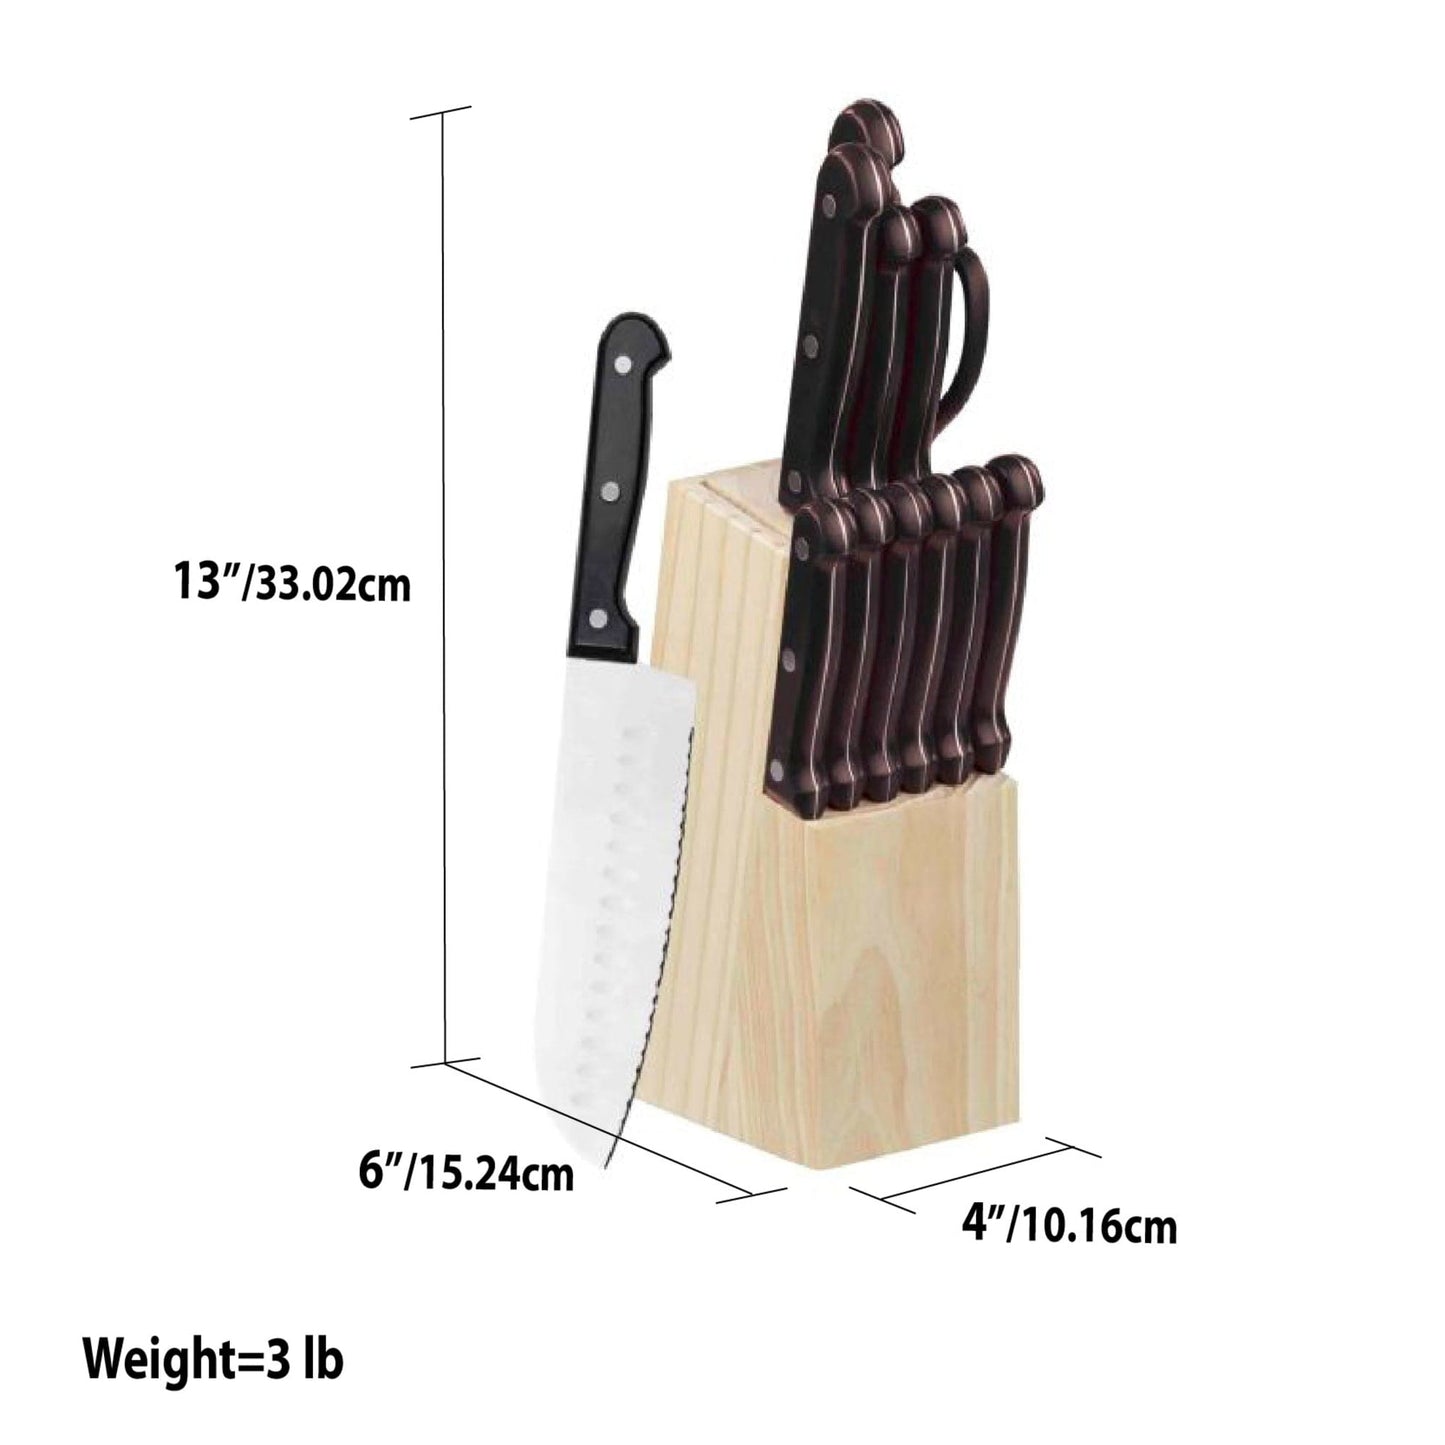 13 Piece Knife Set with Block in Black